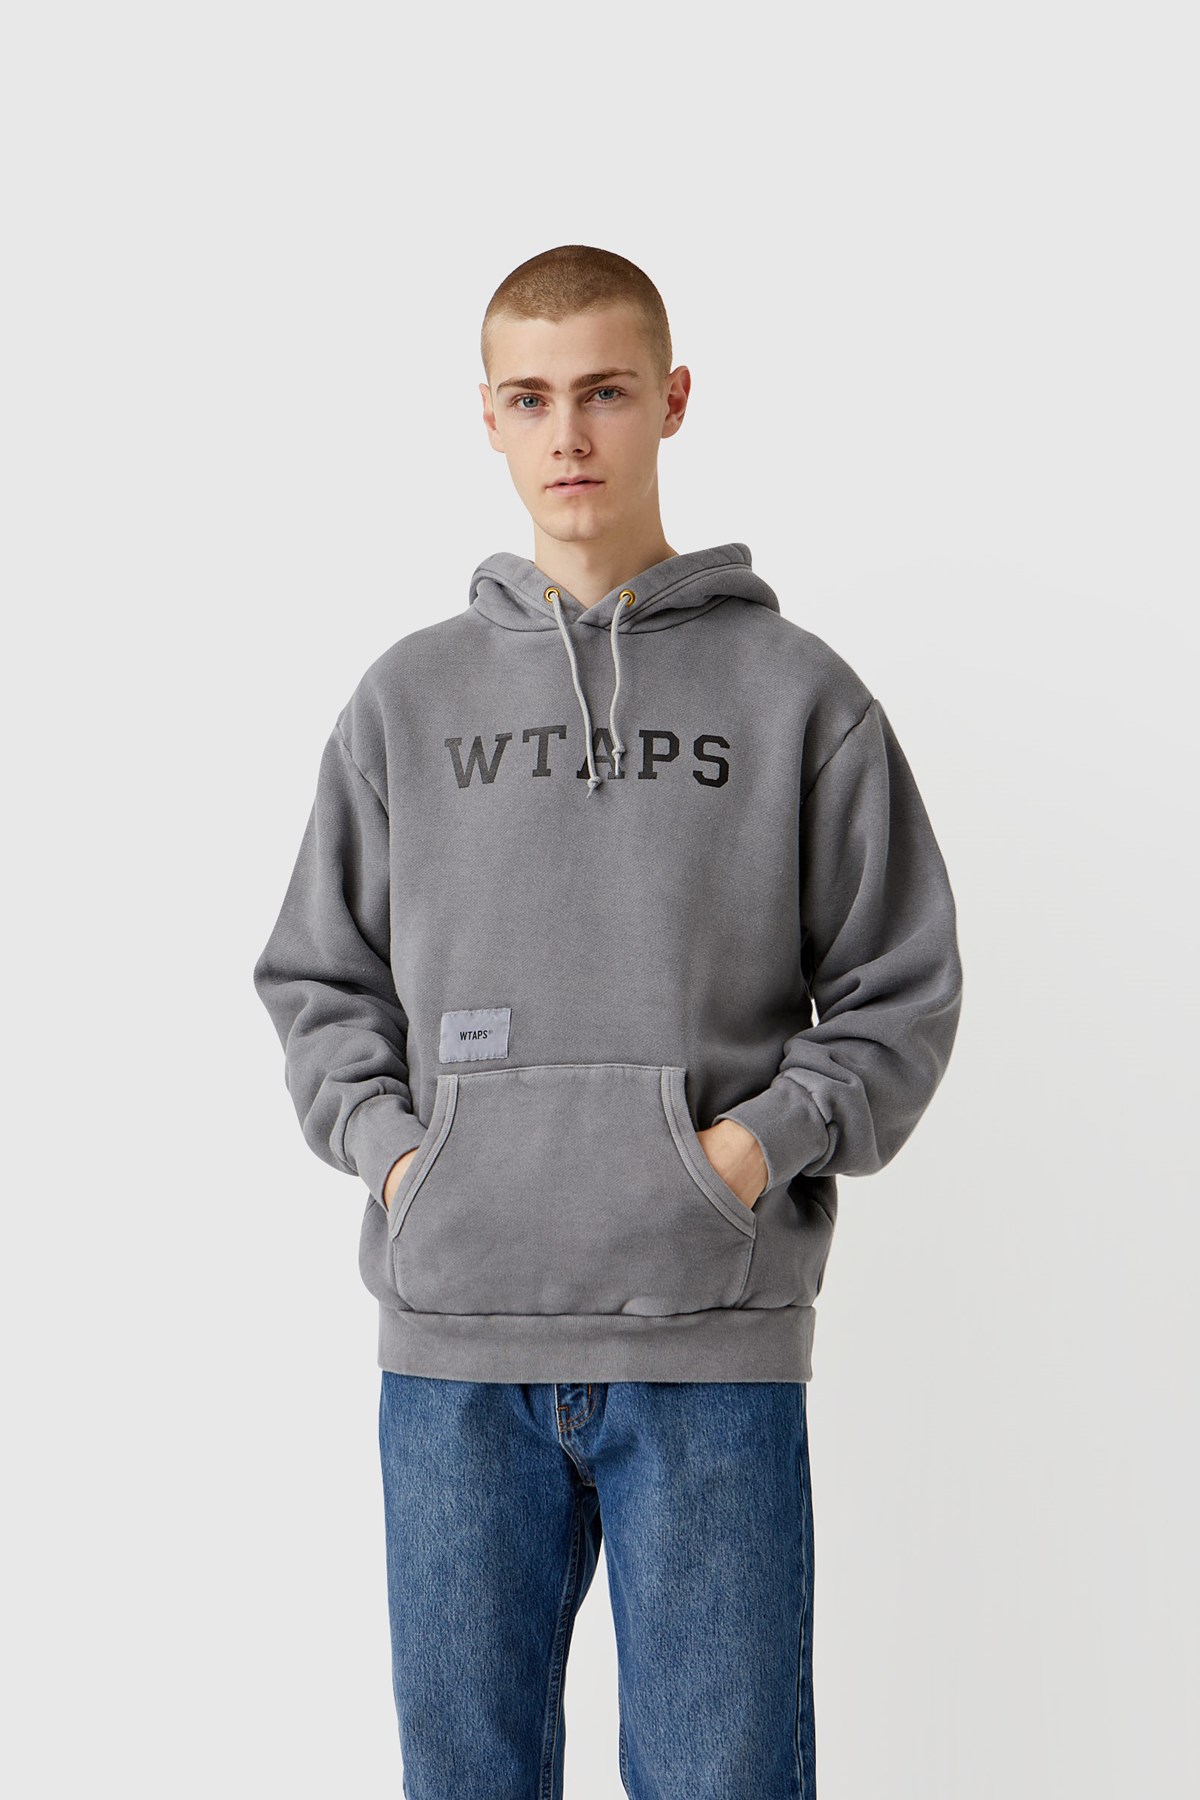 19aw WTAPS COLLEGE DESIGN HOODED パーカー　XL